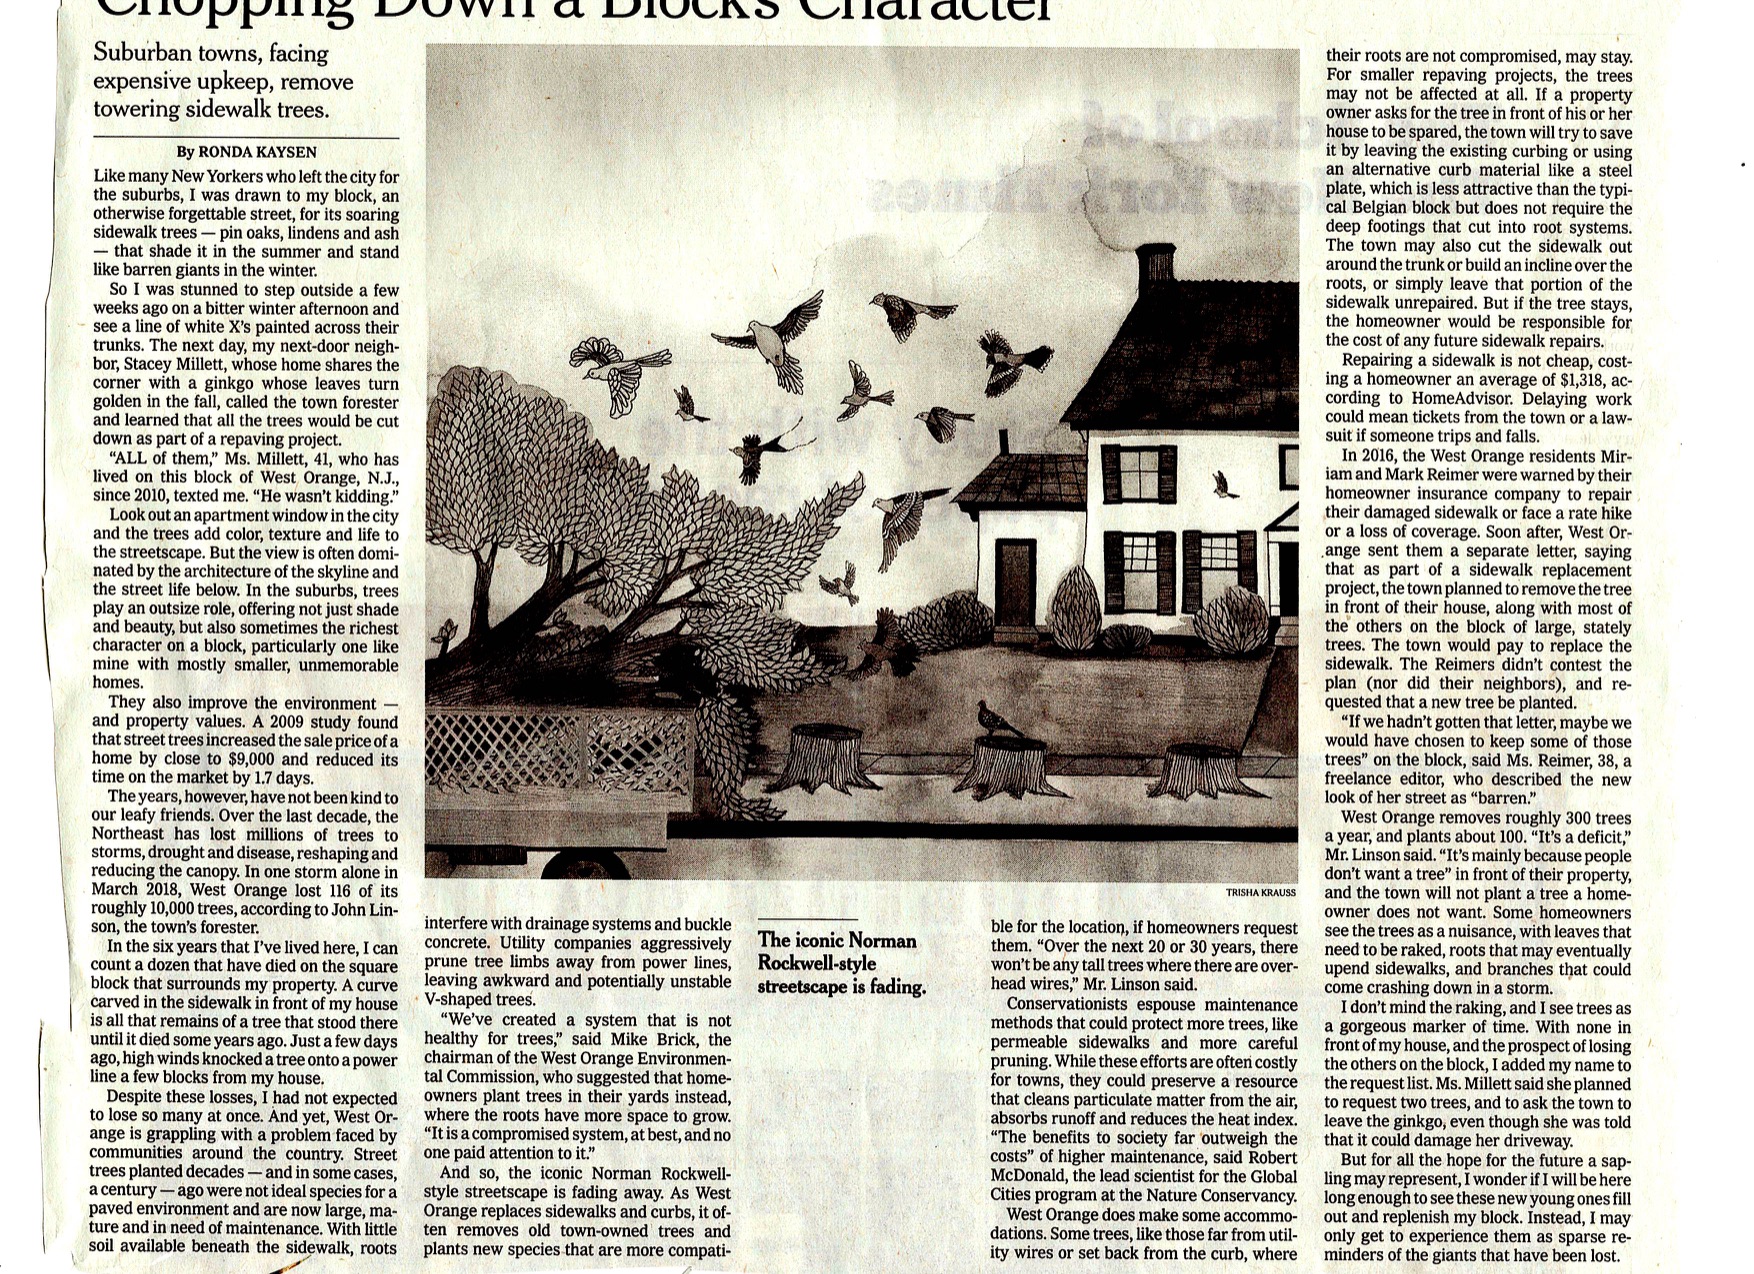 New York Times Report on the Dwindling of City Street Trees in America (3-6-19)